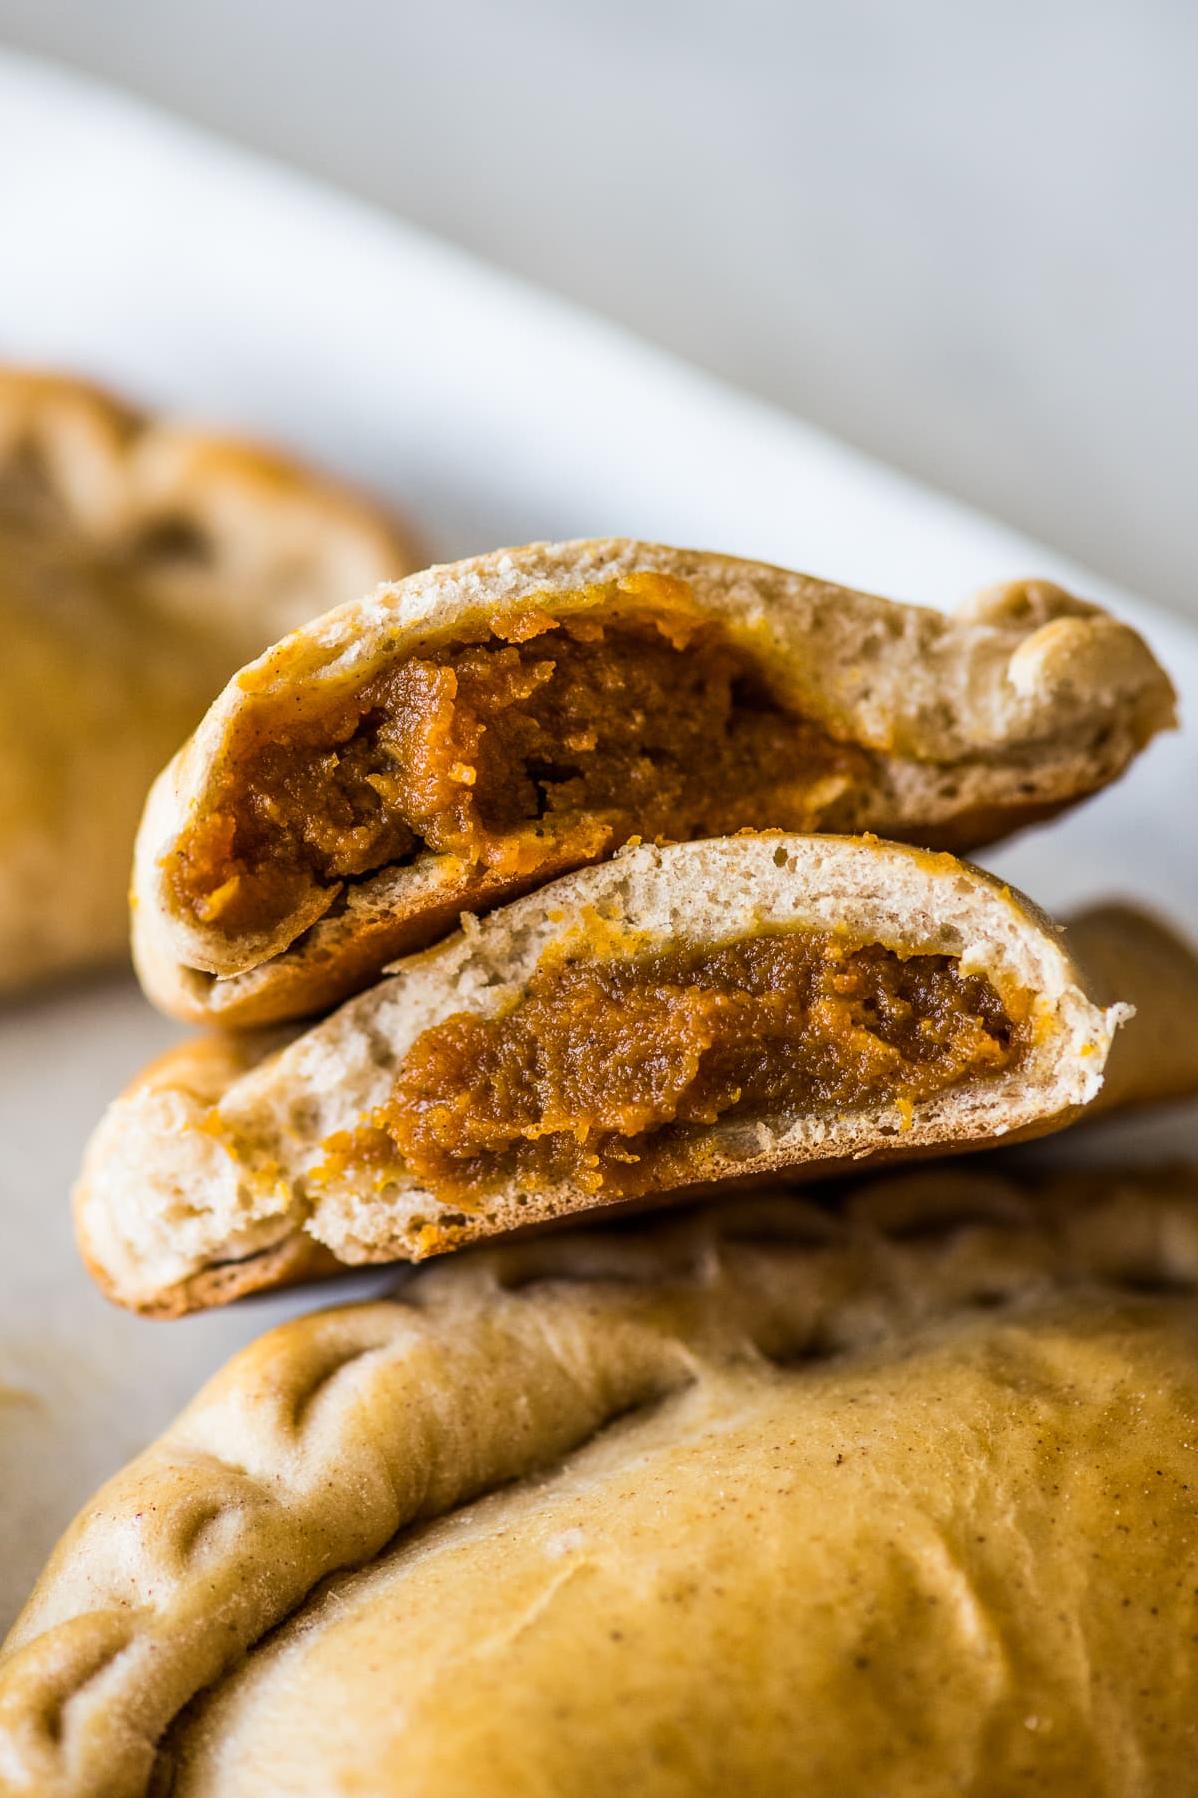  Every bite of these empanadas delivers a burst of warm pumpkin goodness.